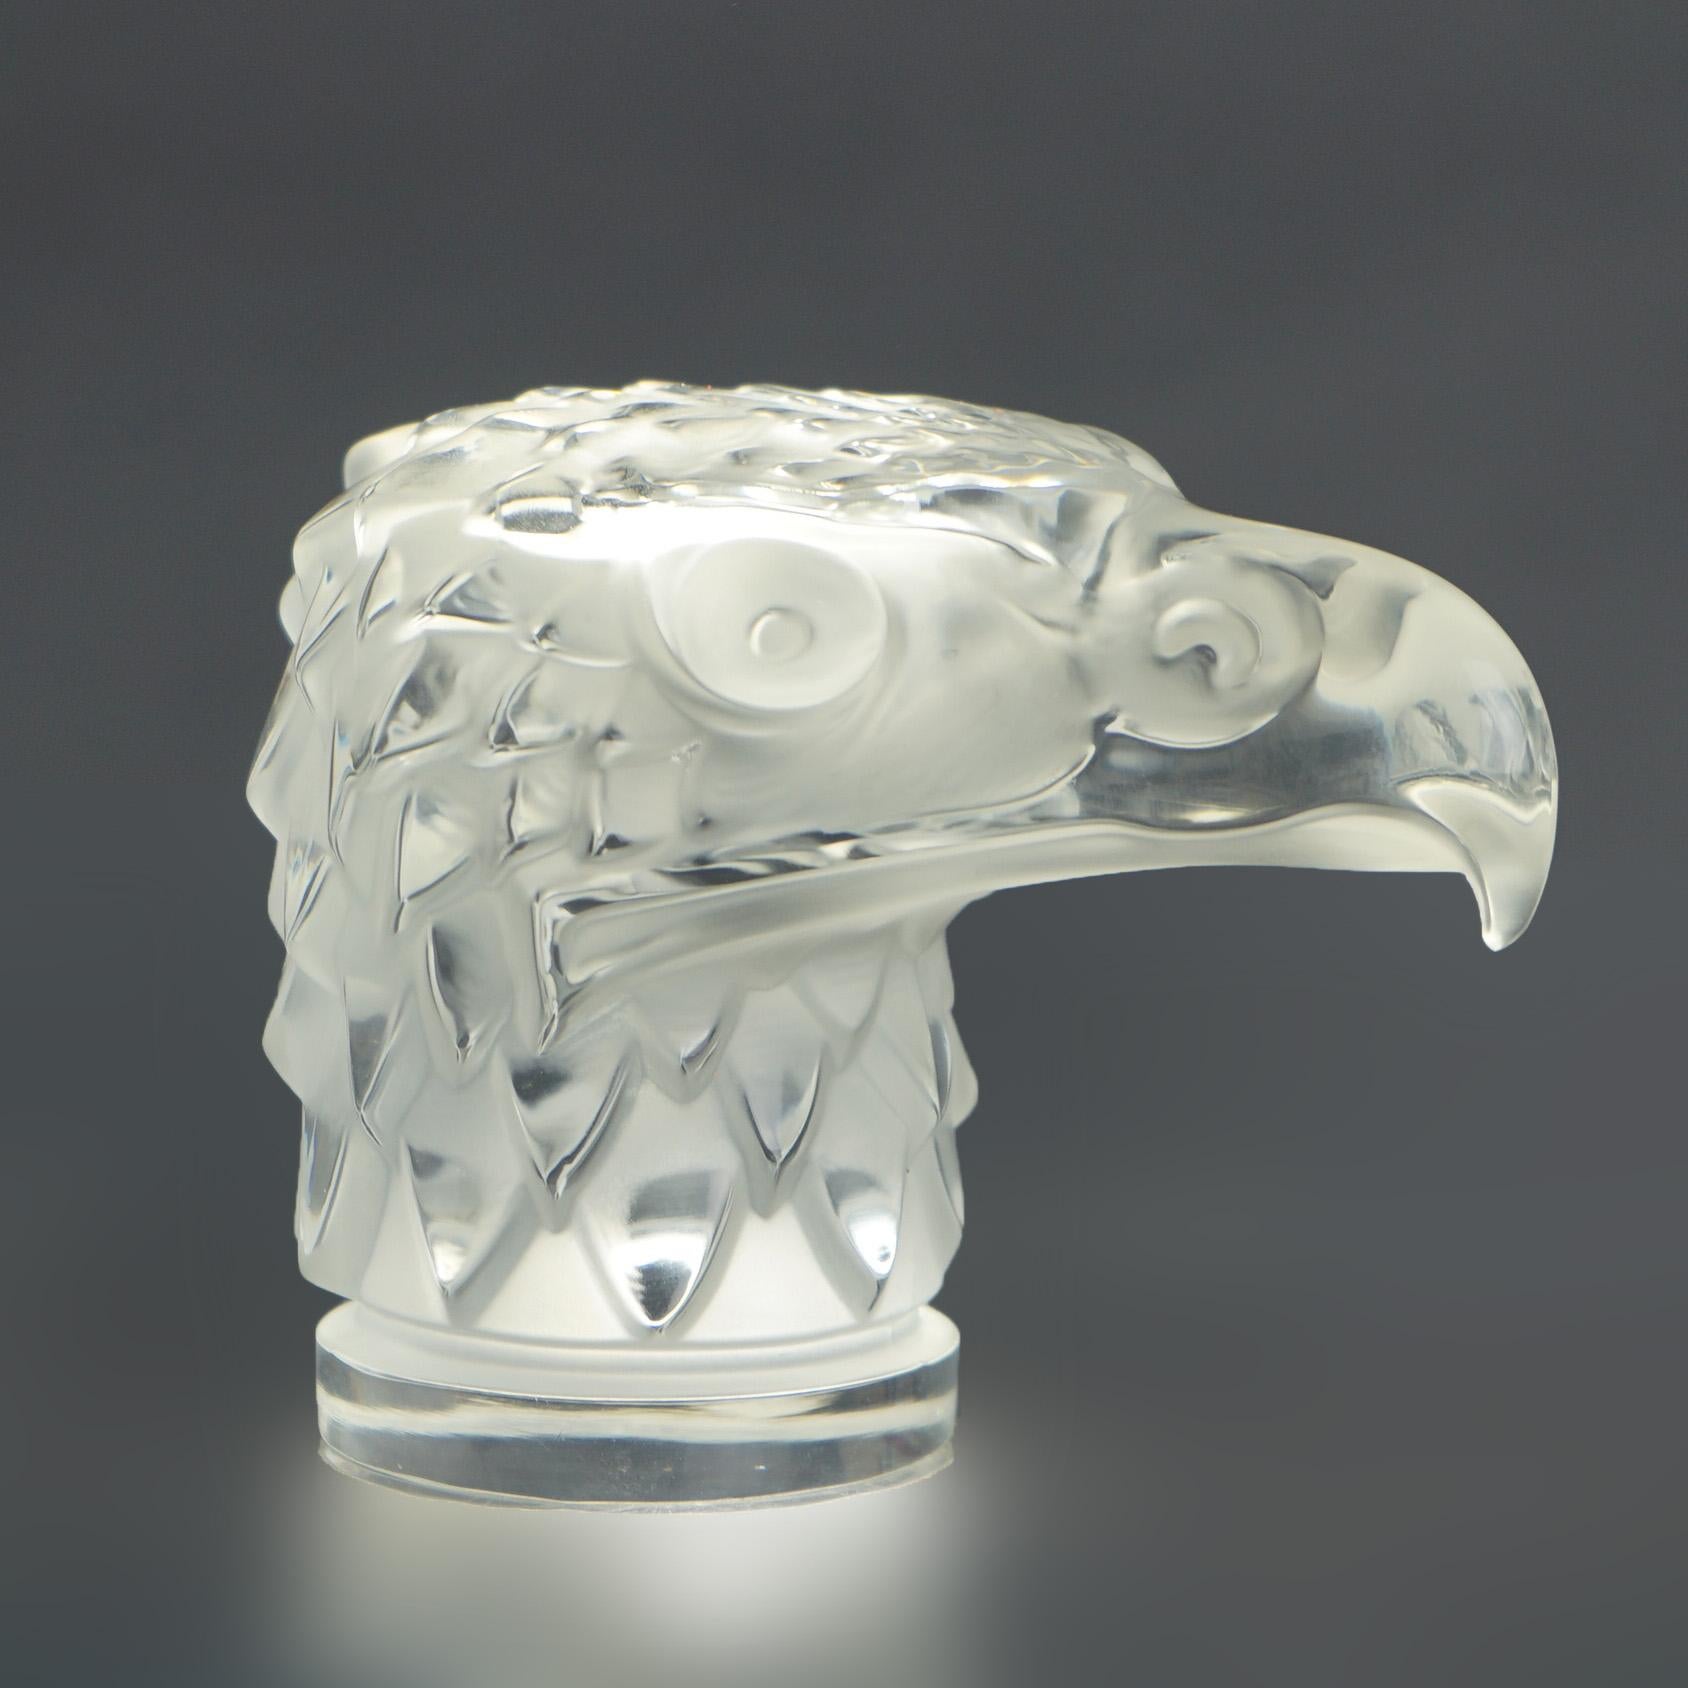 20th Century French Lalique Crystal Glass Figural Eagle Head Paperweight, Signed, 20thC